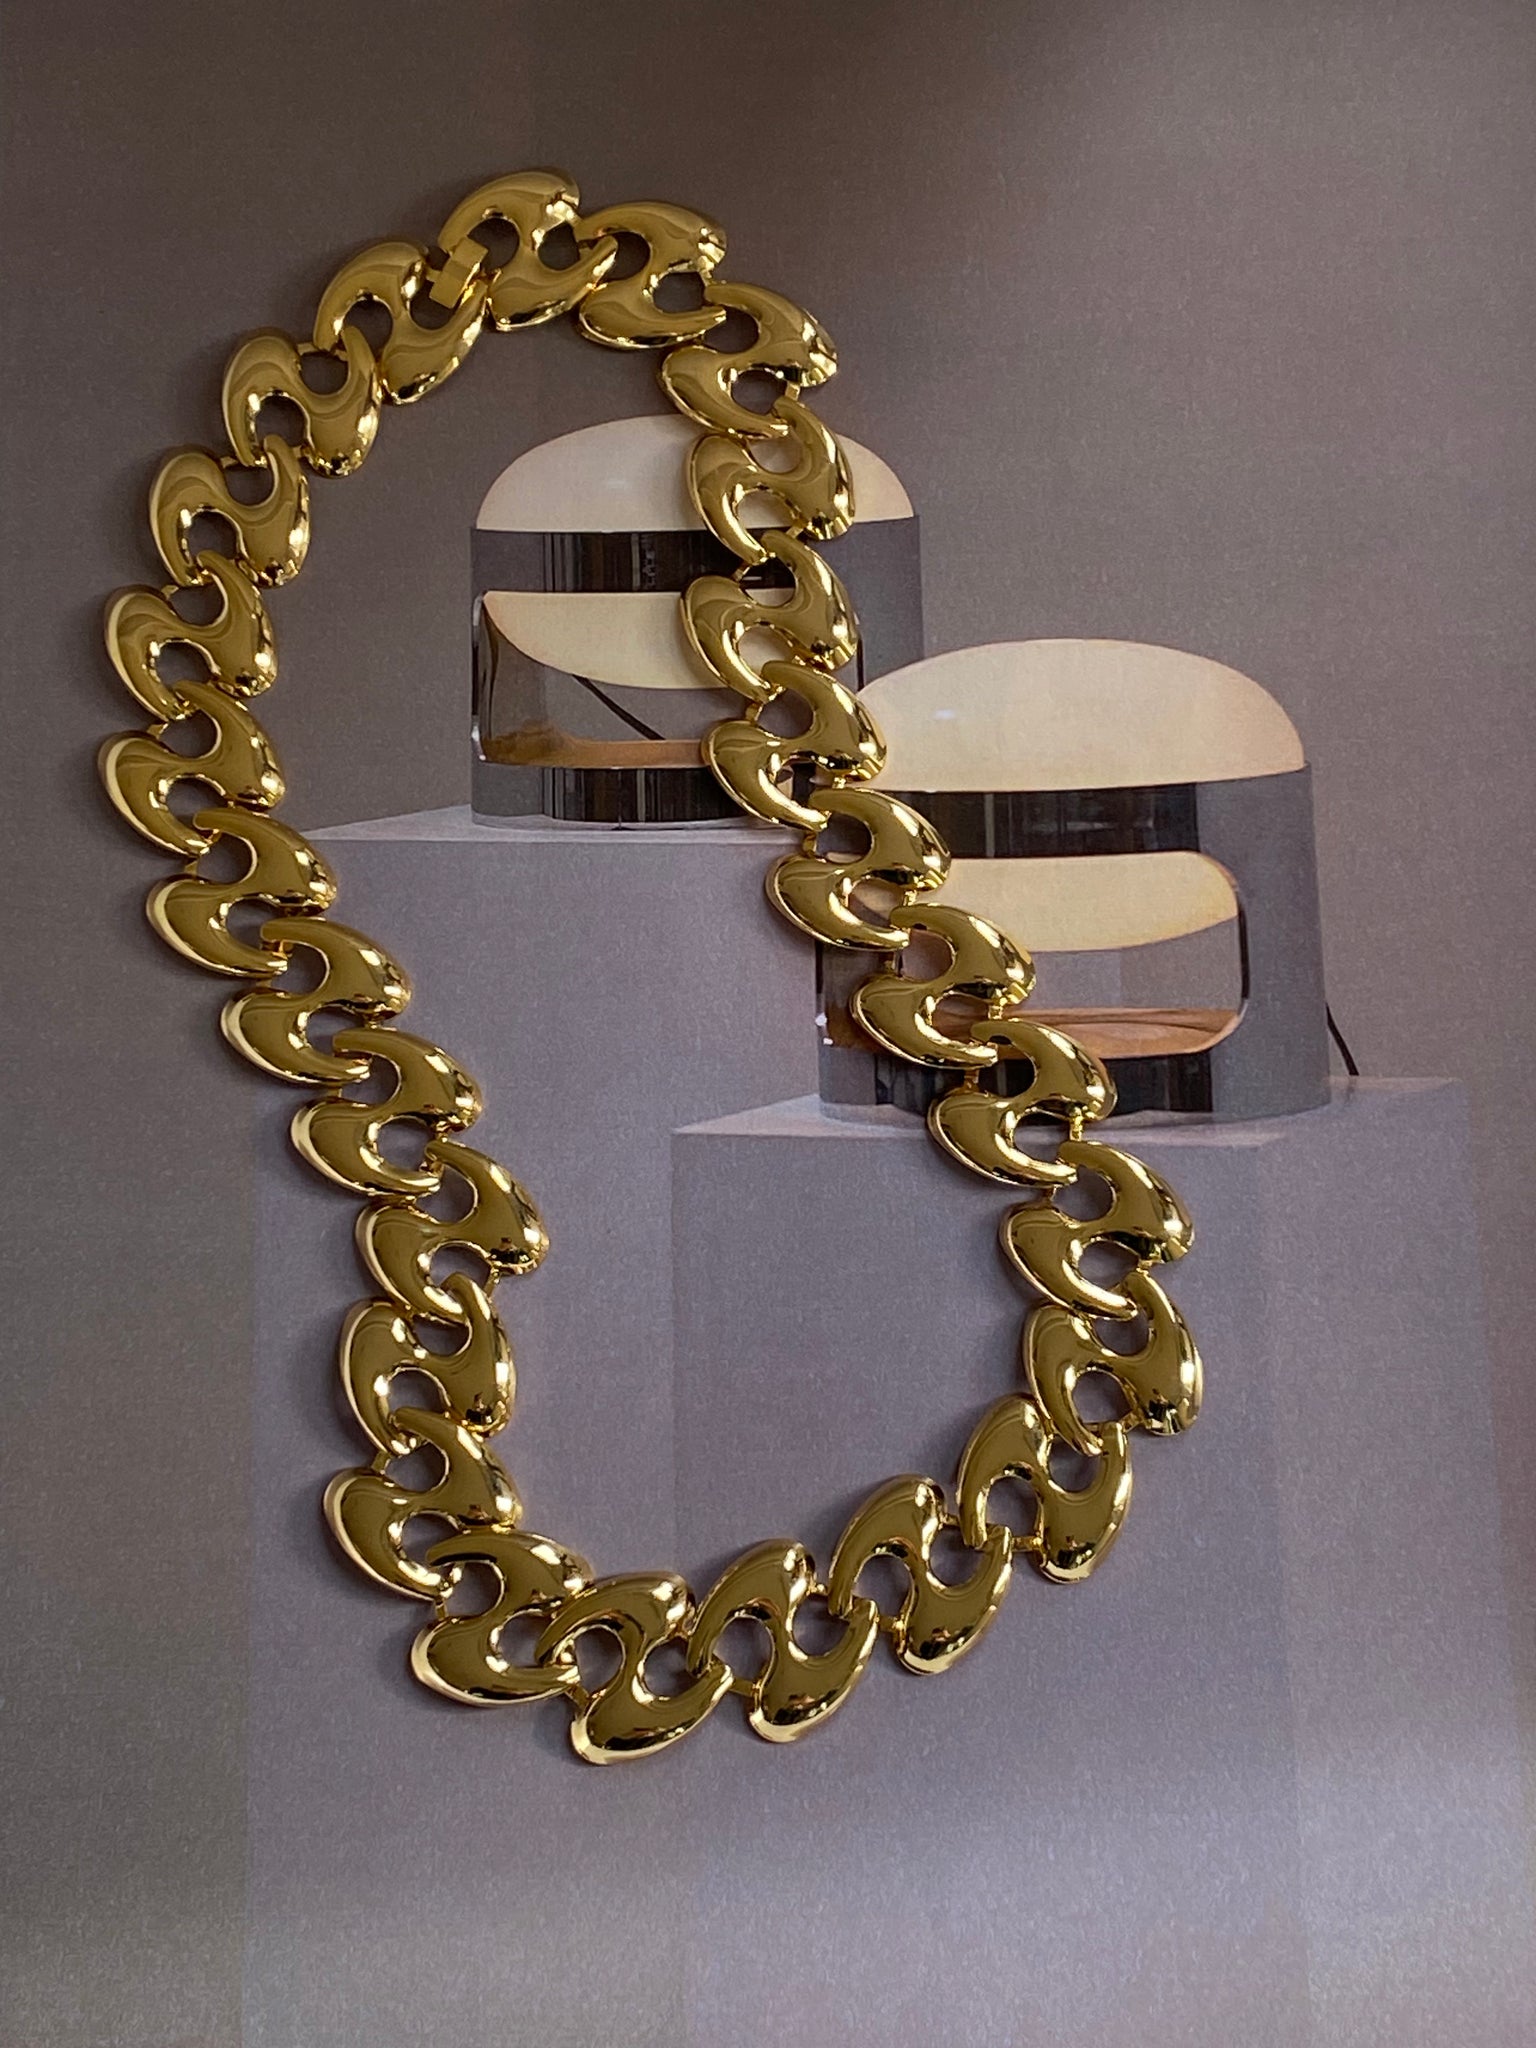 1980- 1990 Gold Plated Wavy Statement Necklace